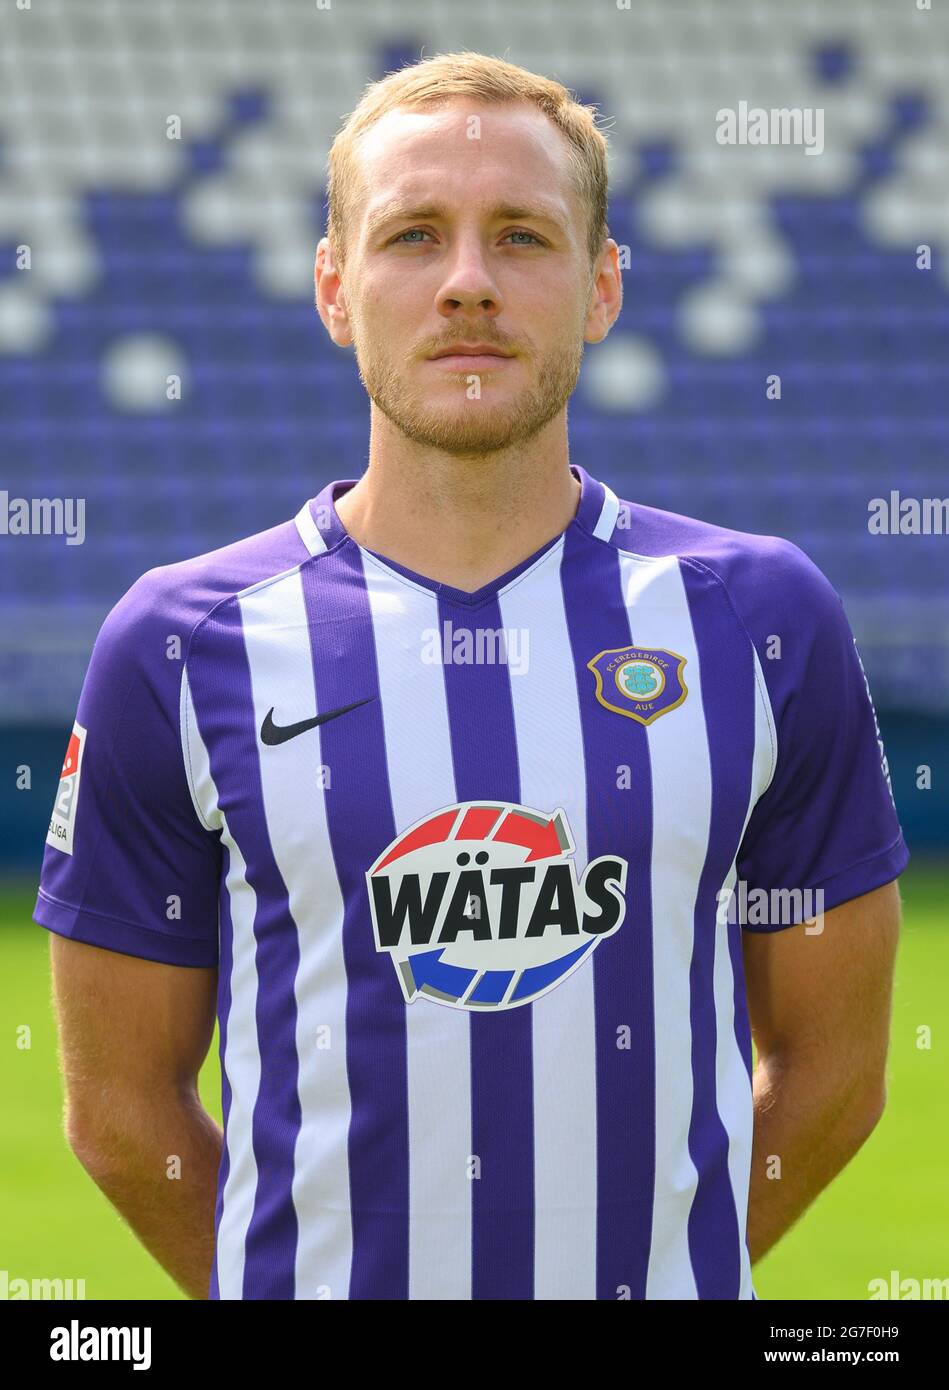 Aue, Germany. 13th July, 2021. Football: 2. league, media day, season 2021/2021, FC Erzgebirge Aue, at Erzgebirgsstadion. Player Ben Zolinski. Credit: Robert Michael/dpa-Zentralbild/dpa - IMPORTANT NOTE: In accordance with the regulations of the DFL Deutsche Fußball Liga and/or the DFB Deutscher Fußball-Bund, it is prohibited to use or have used photographs taken in the stadium and/or of the match in the form of sequence pictures and/or video-like photo series./dpa/Alamy Live News Stock Photo